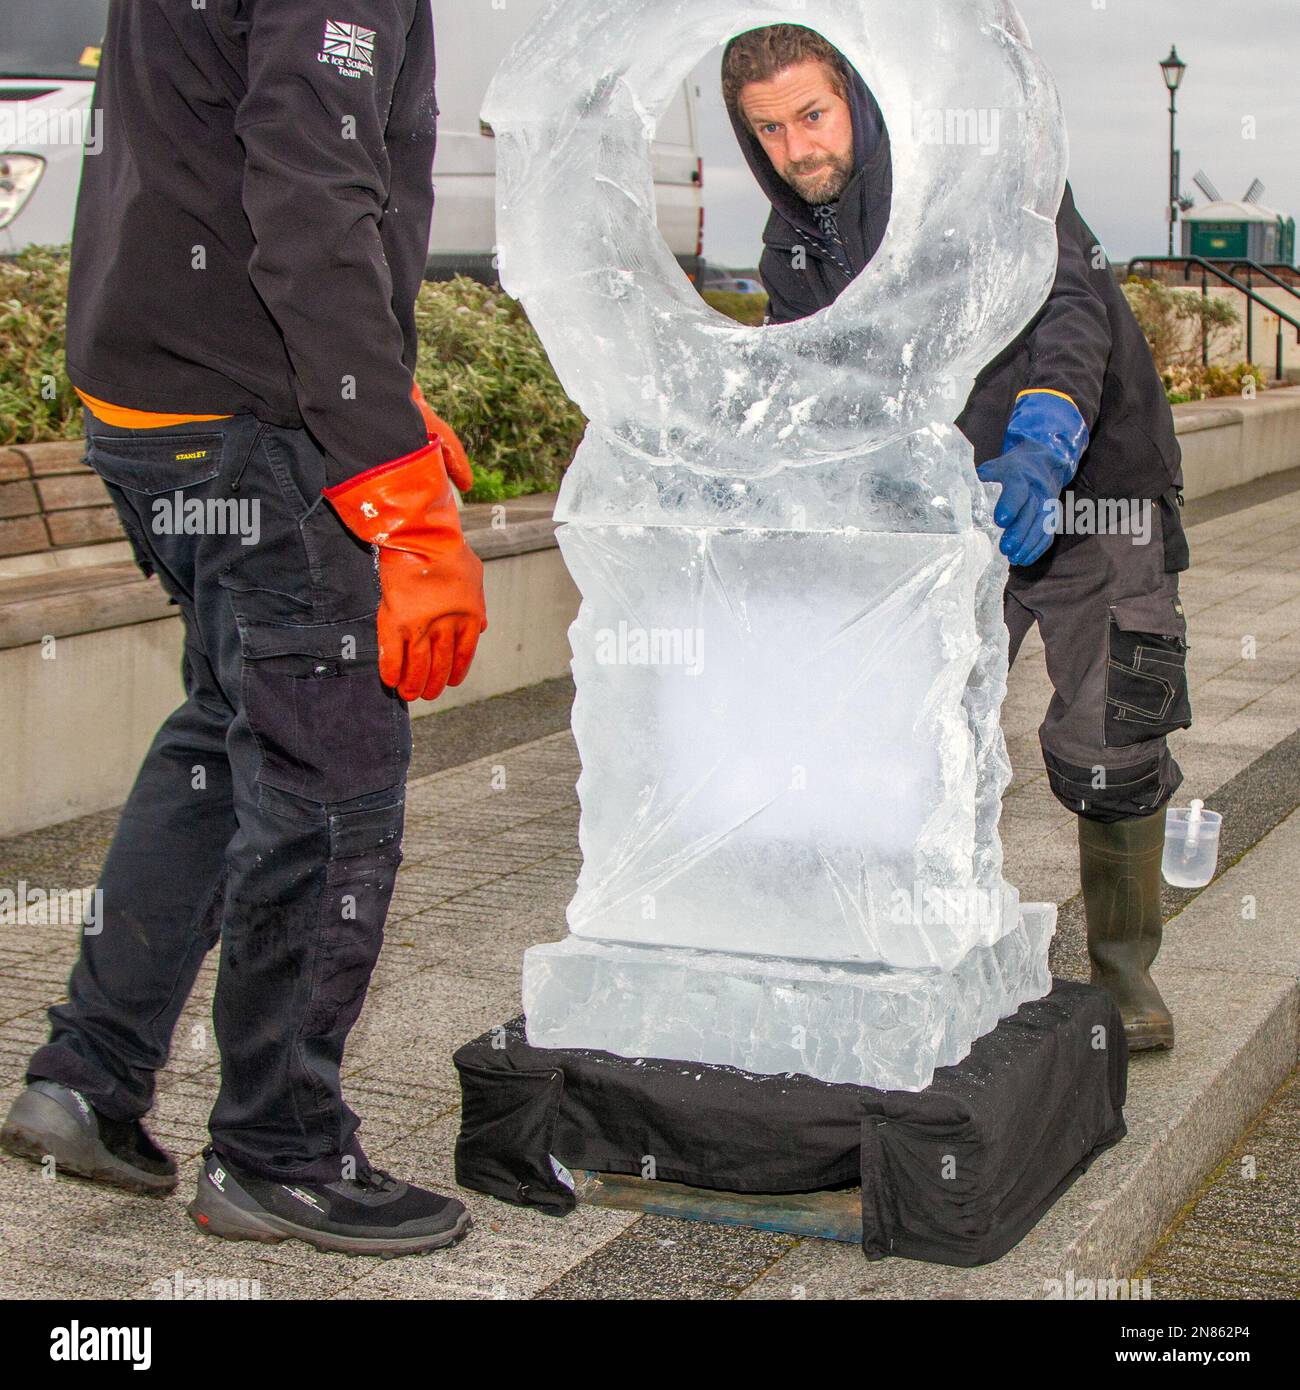 Lytham St. Annes, Lancashire. 11 Feb 2023 Ice sculpting festival. Marvellous ice sculptures at Lytham's lost concrete mussel tanks, Glacial Art Ice Sculptures carve animals, characters and mystical creatures & designs out of huge blocks of ice. Stock Photo